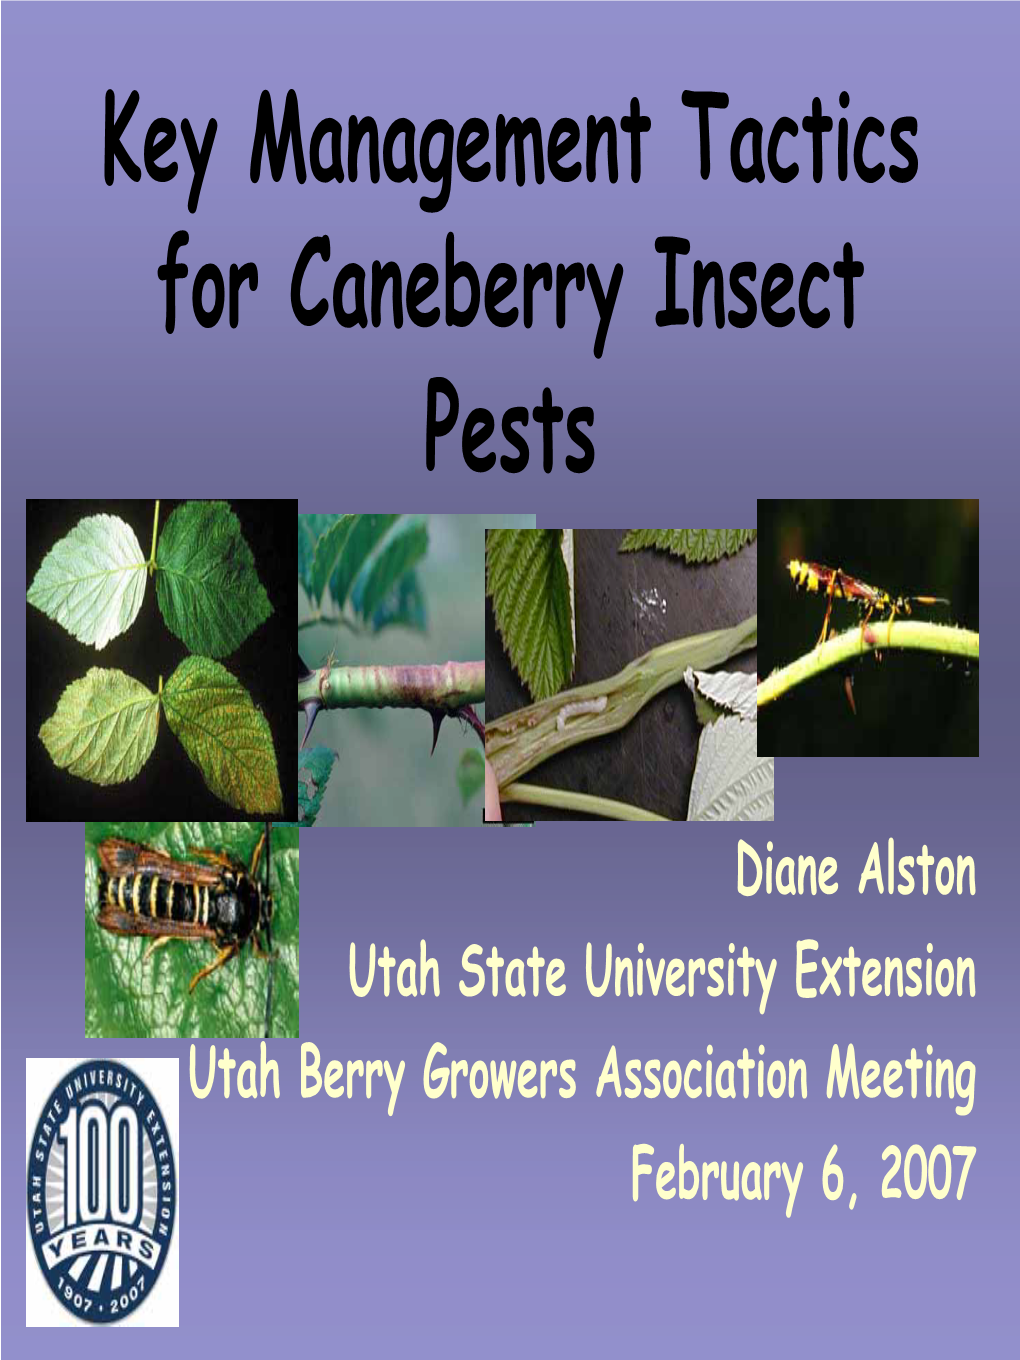 Key Management Tactics for Caneberry Insect Pests